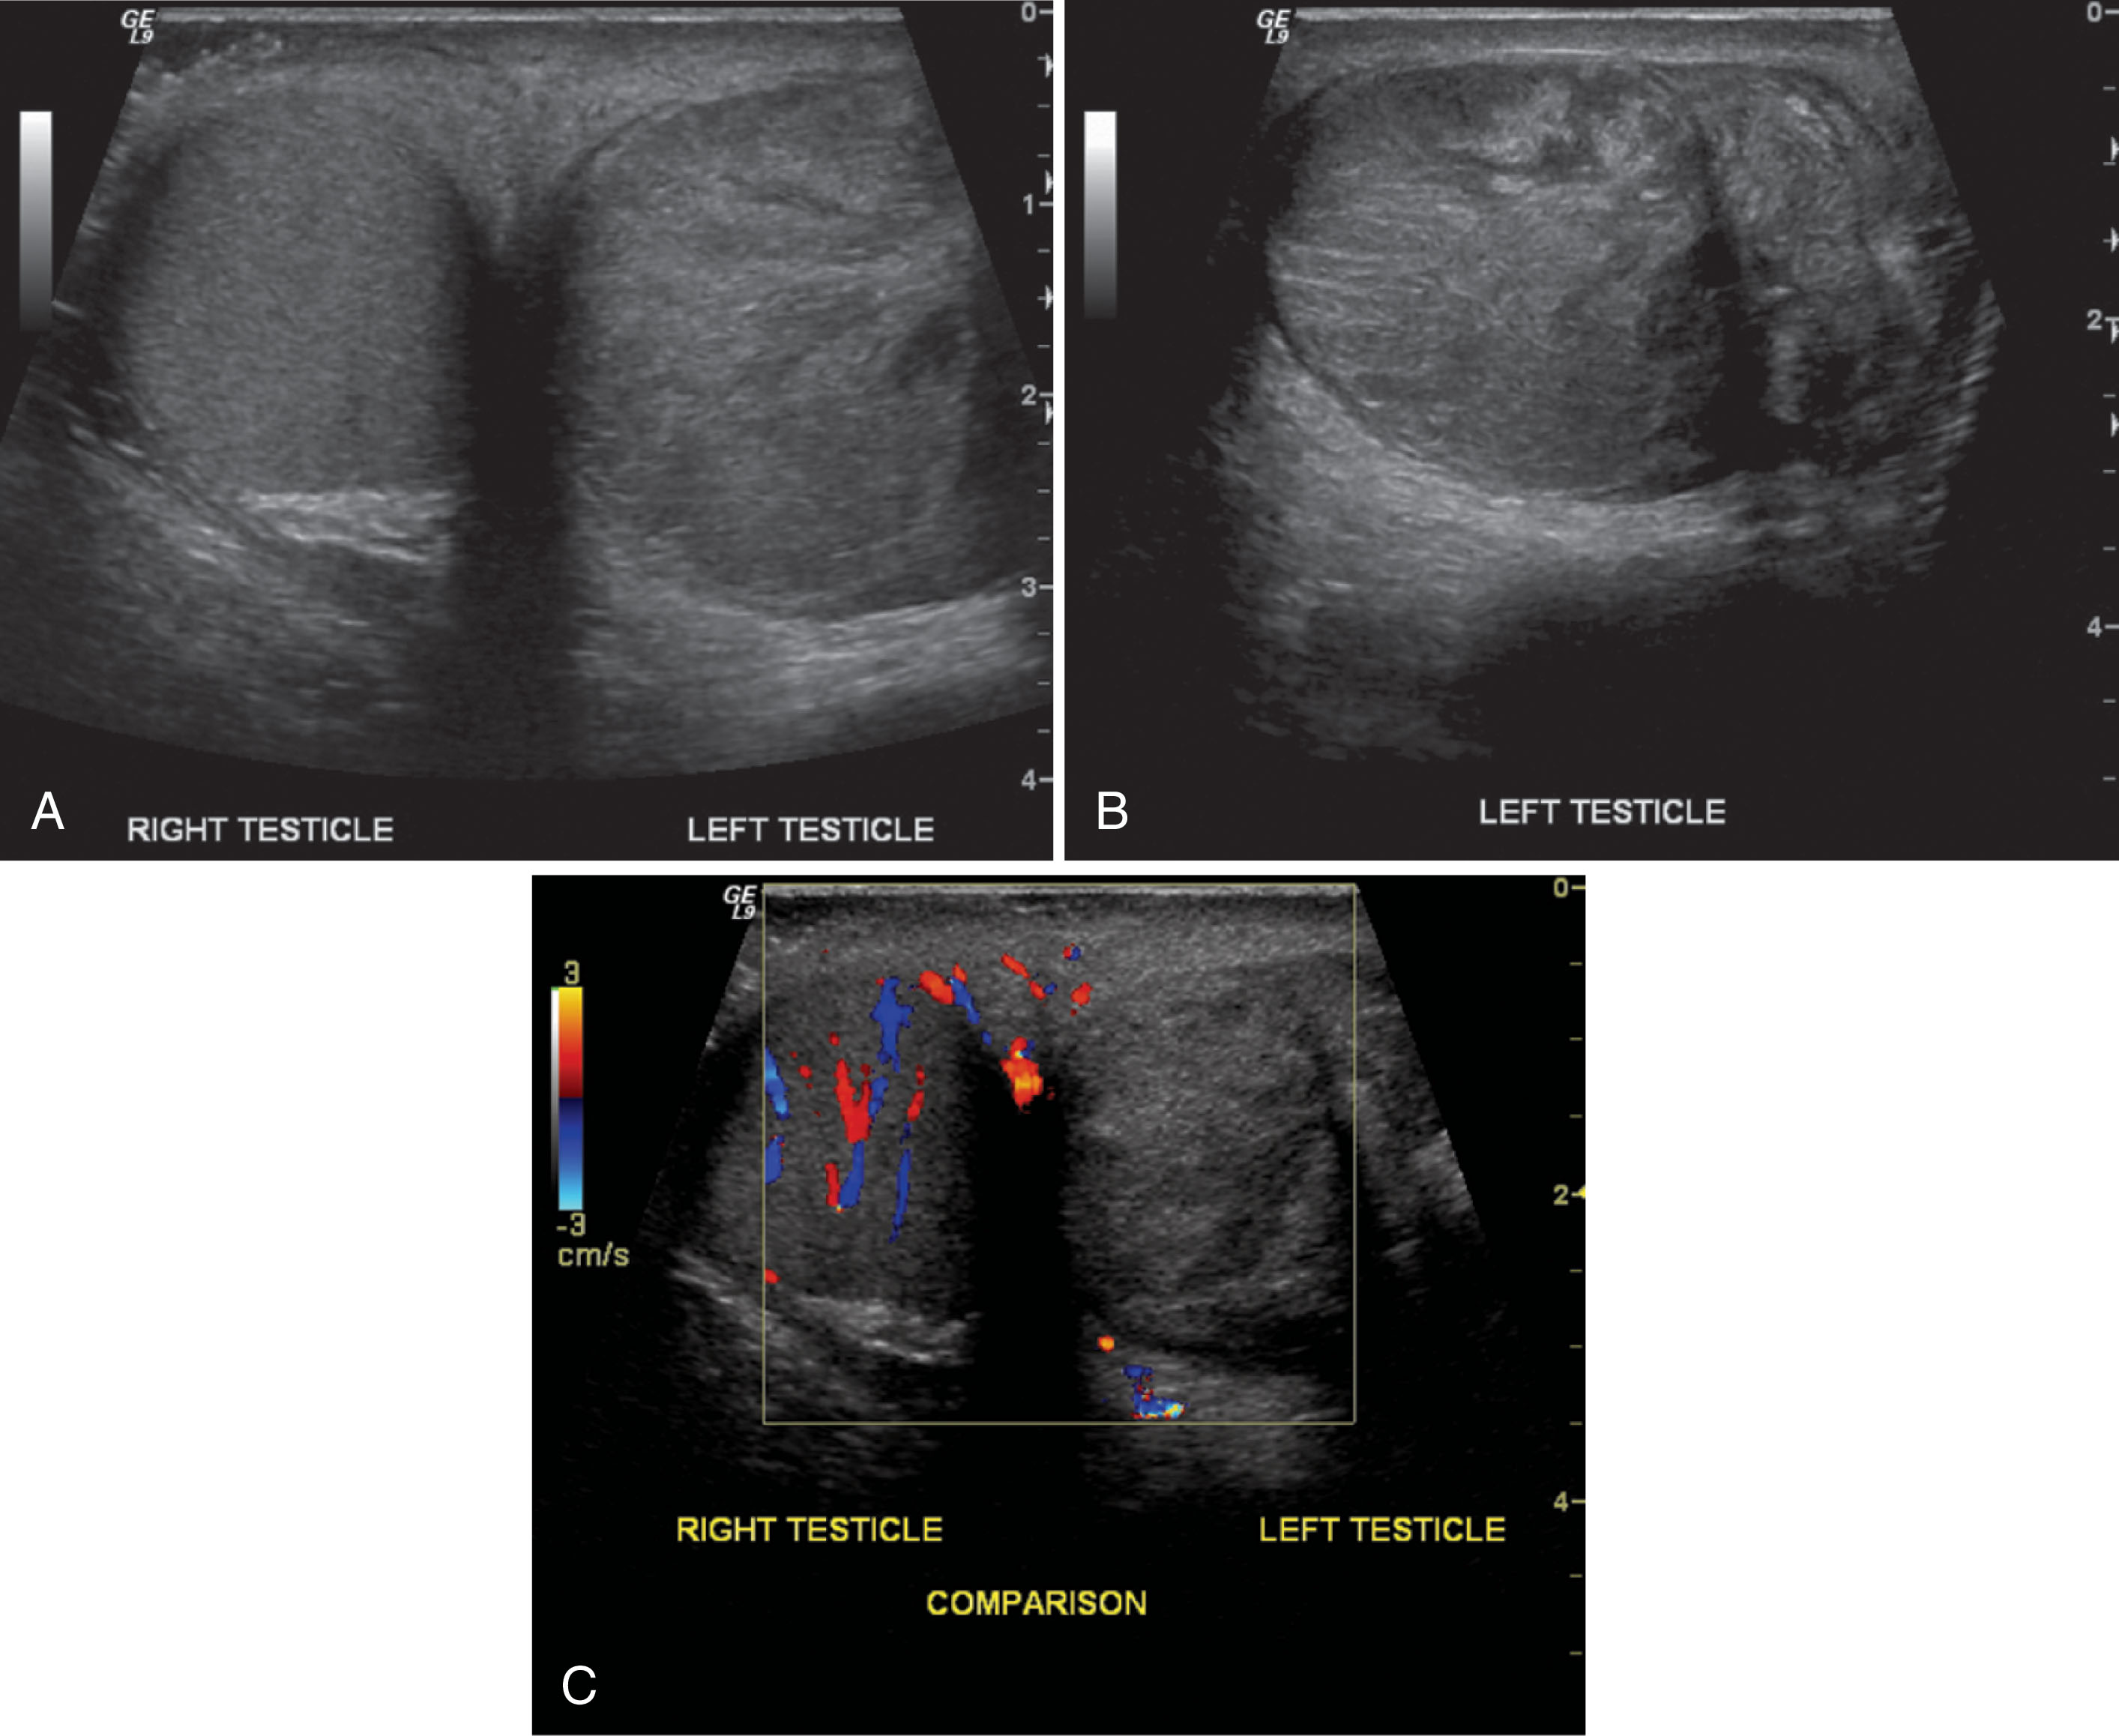 Fig. 23.19, Left spermatic cord torsion in adolescent with a history of scrotal pain of duration greater than 24 hours. (A) Transverse ultrasound image showing both testes. The left testis is enlarged and heterogeneous. (B) Sagittal ultrasound image of the left testis. The infarcted testis has a mixed echo pattern caused by the hemorrhage, necrosis, and vascular congestion associated with spermatic cord torsion exceeding 24 hours. (C) Transverse color Doppler image showing normal perfusion to the right testis with absence of detectable signal on the left side. Paratesticular blood flow is increased around the abnormal testis.